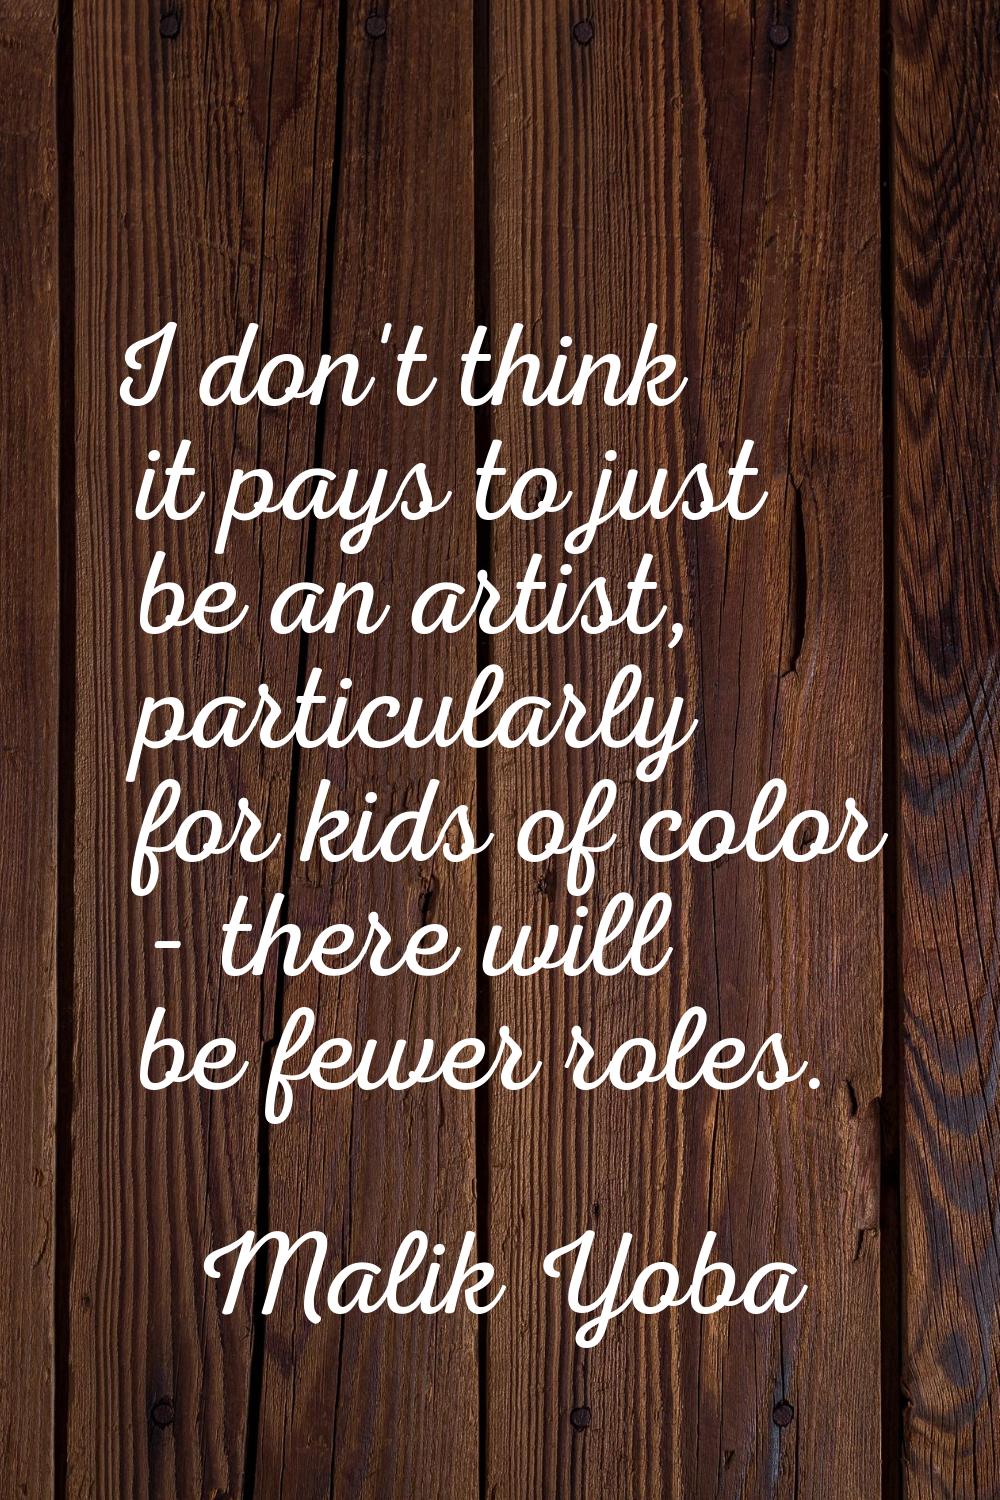 I don't think it pays to just be an artist, particularly for kids of color - there will be fewer ro